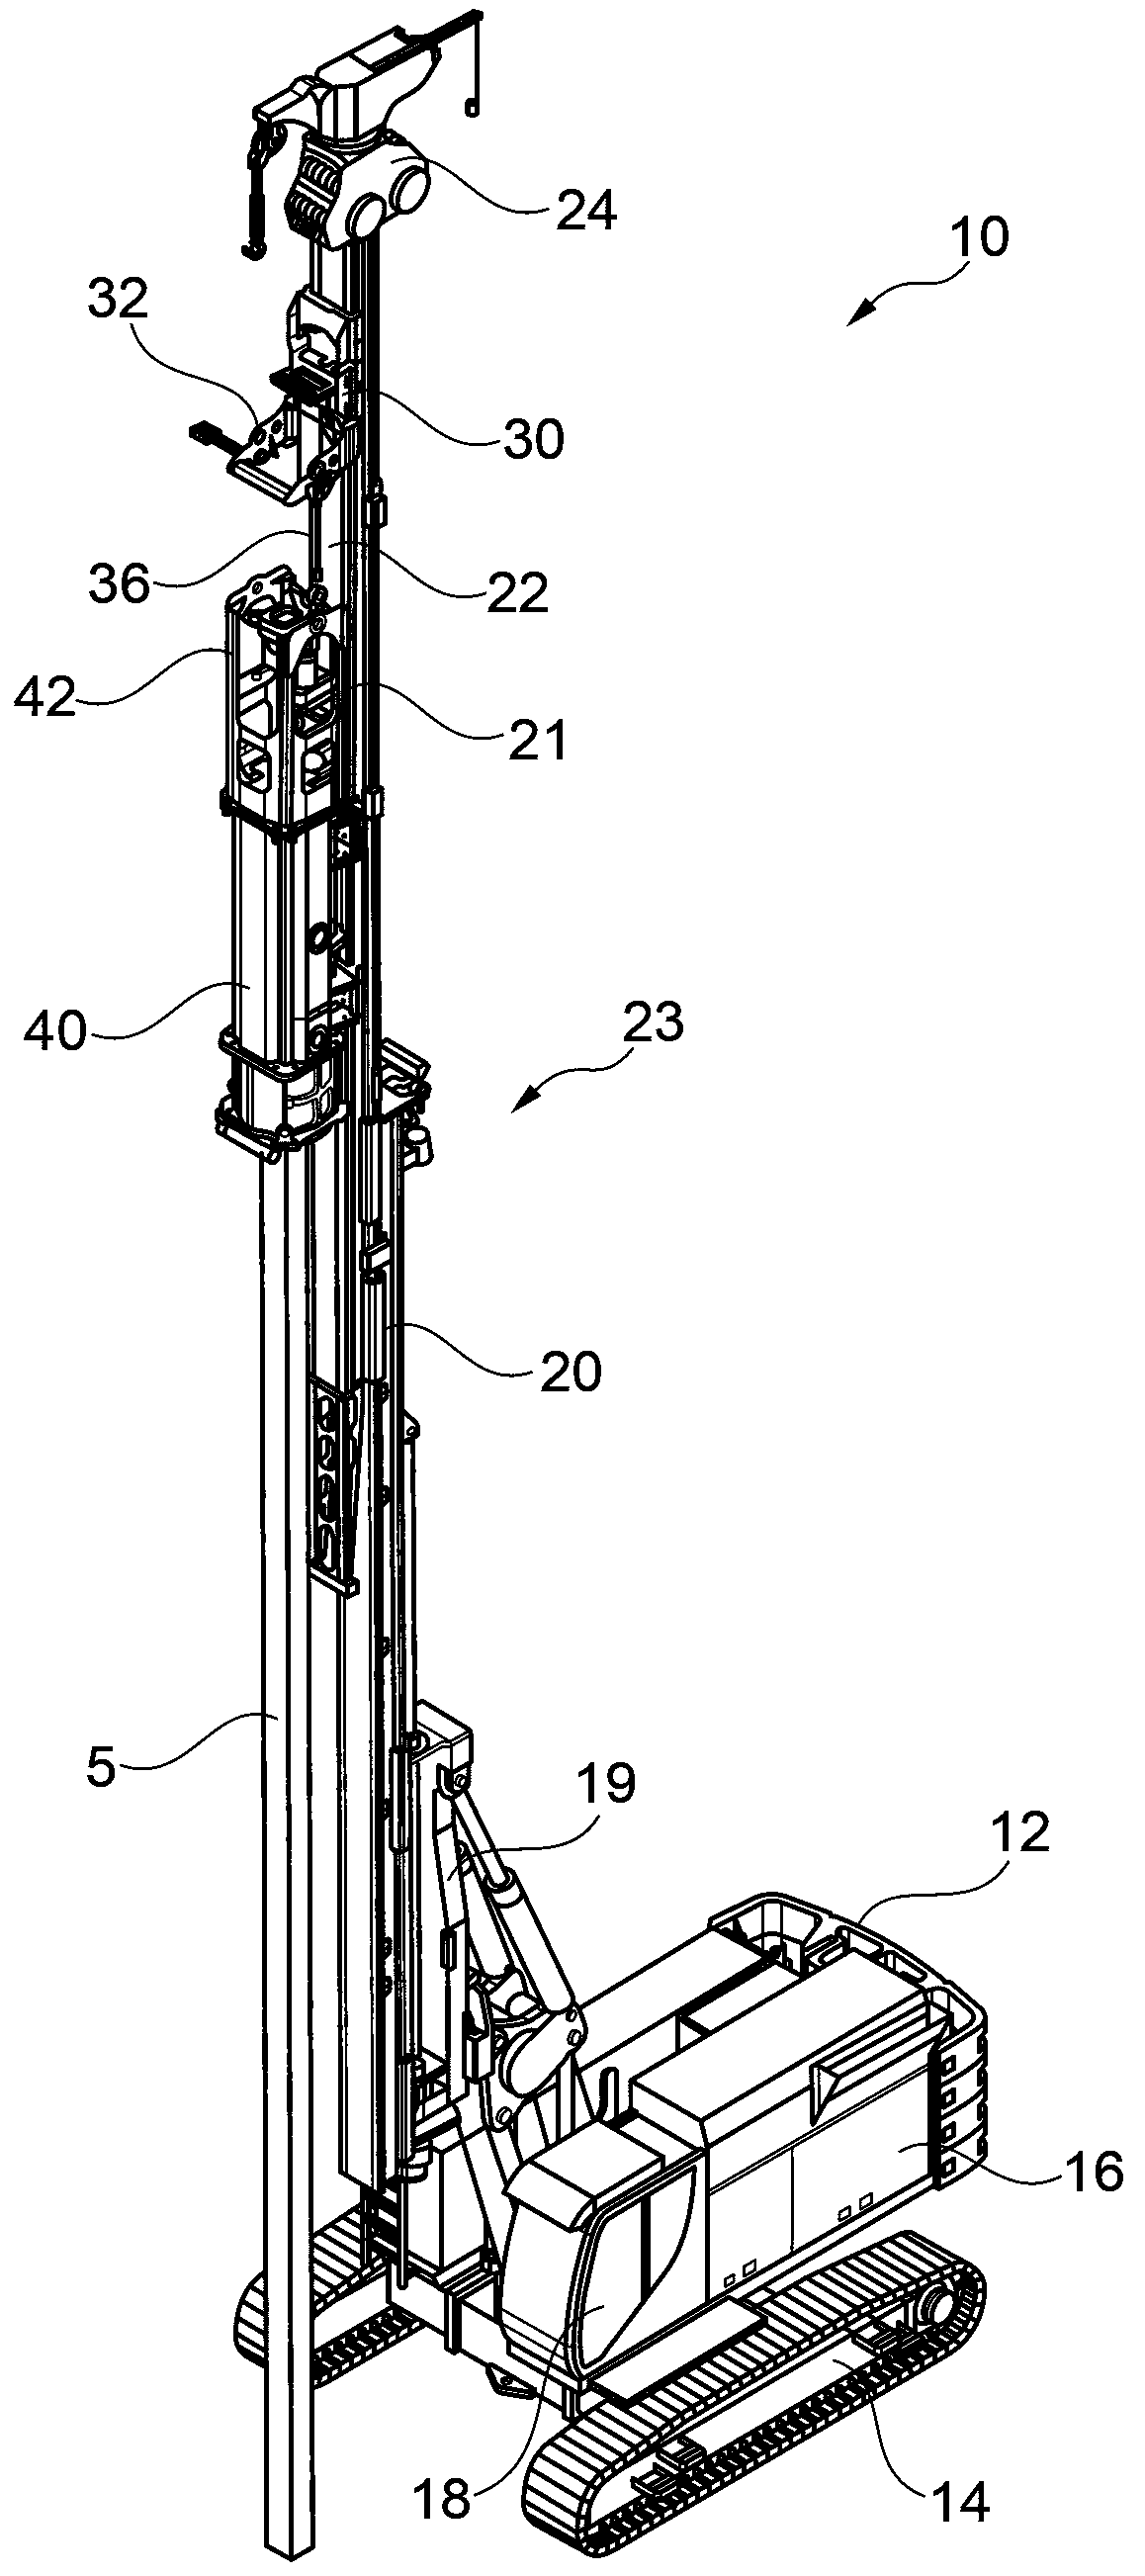 Pile driving device and method for driving pile driving materials